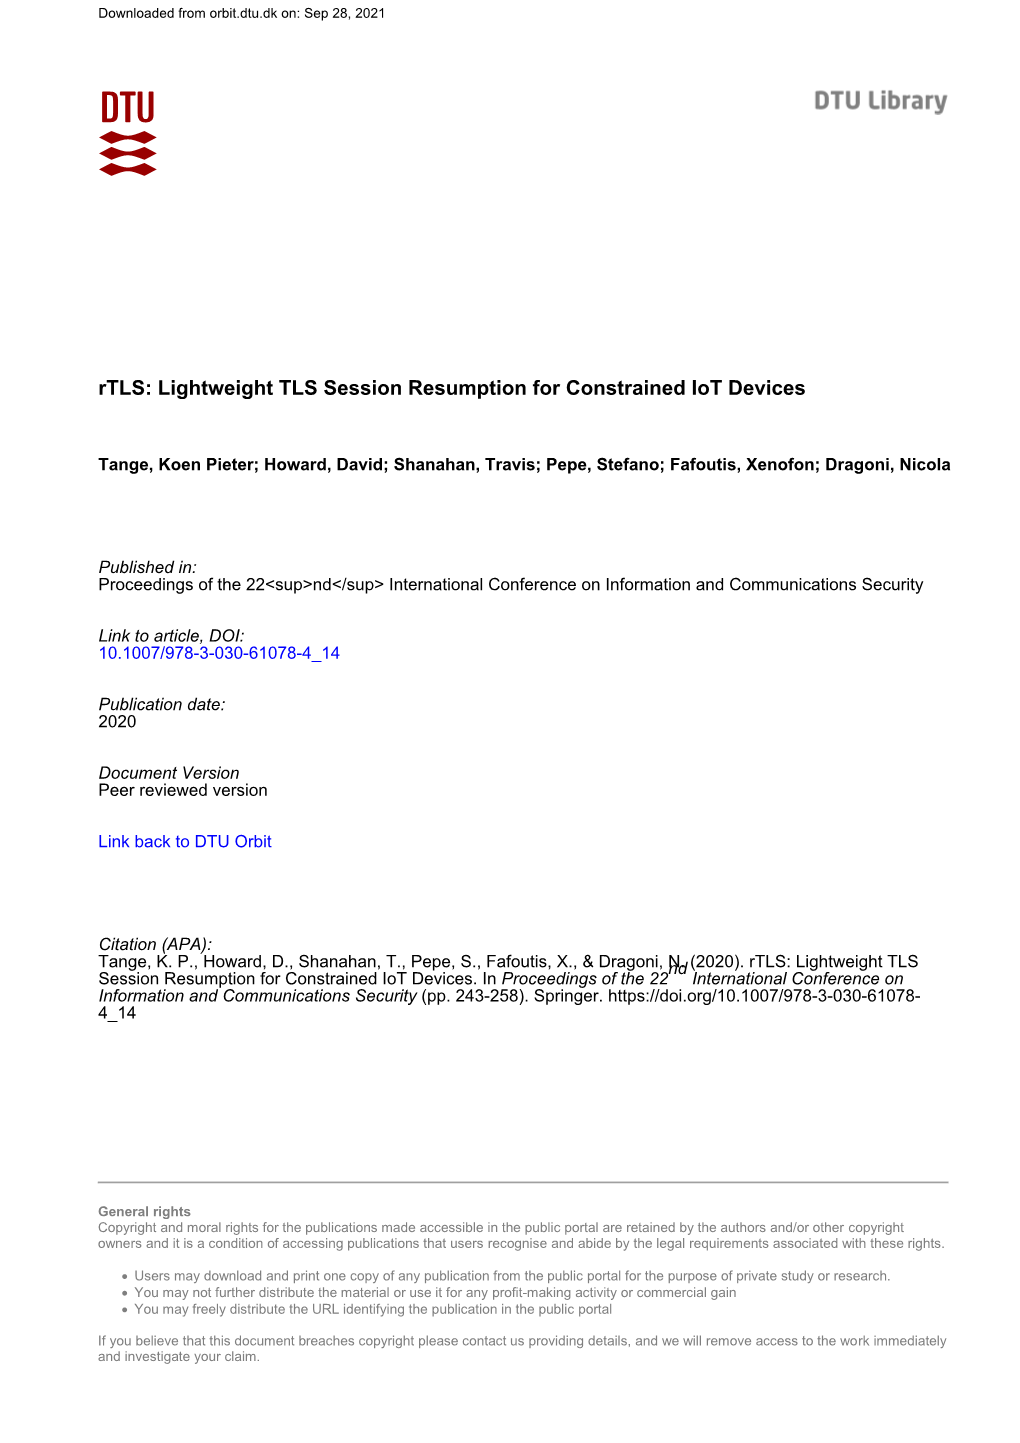 Lightweight TLS Session Resumption for Constrained Iot Devices